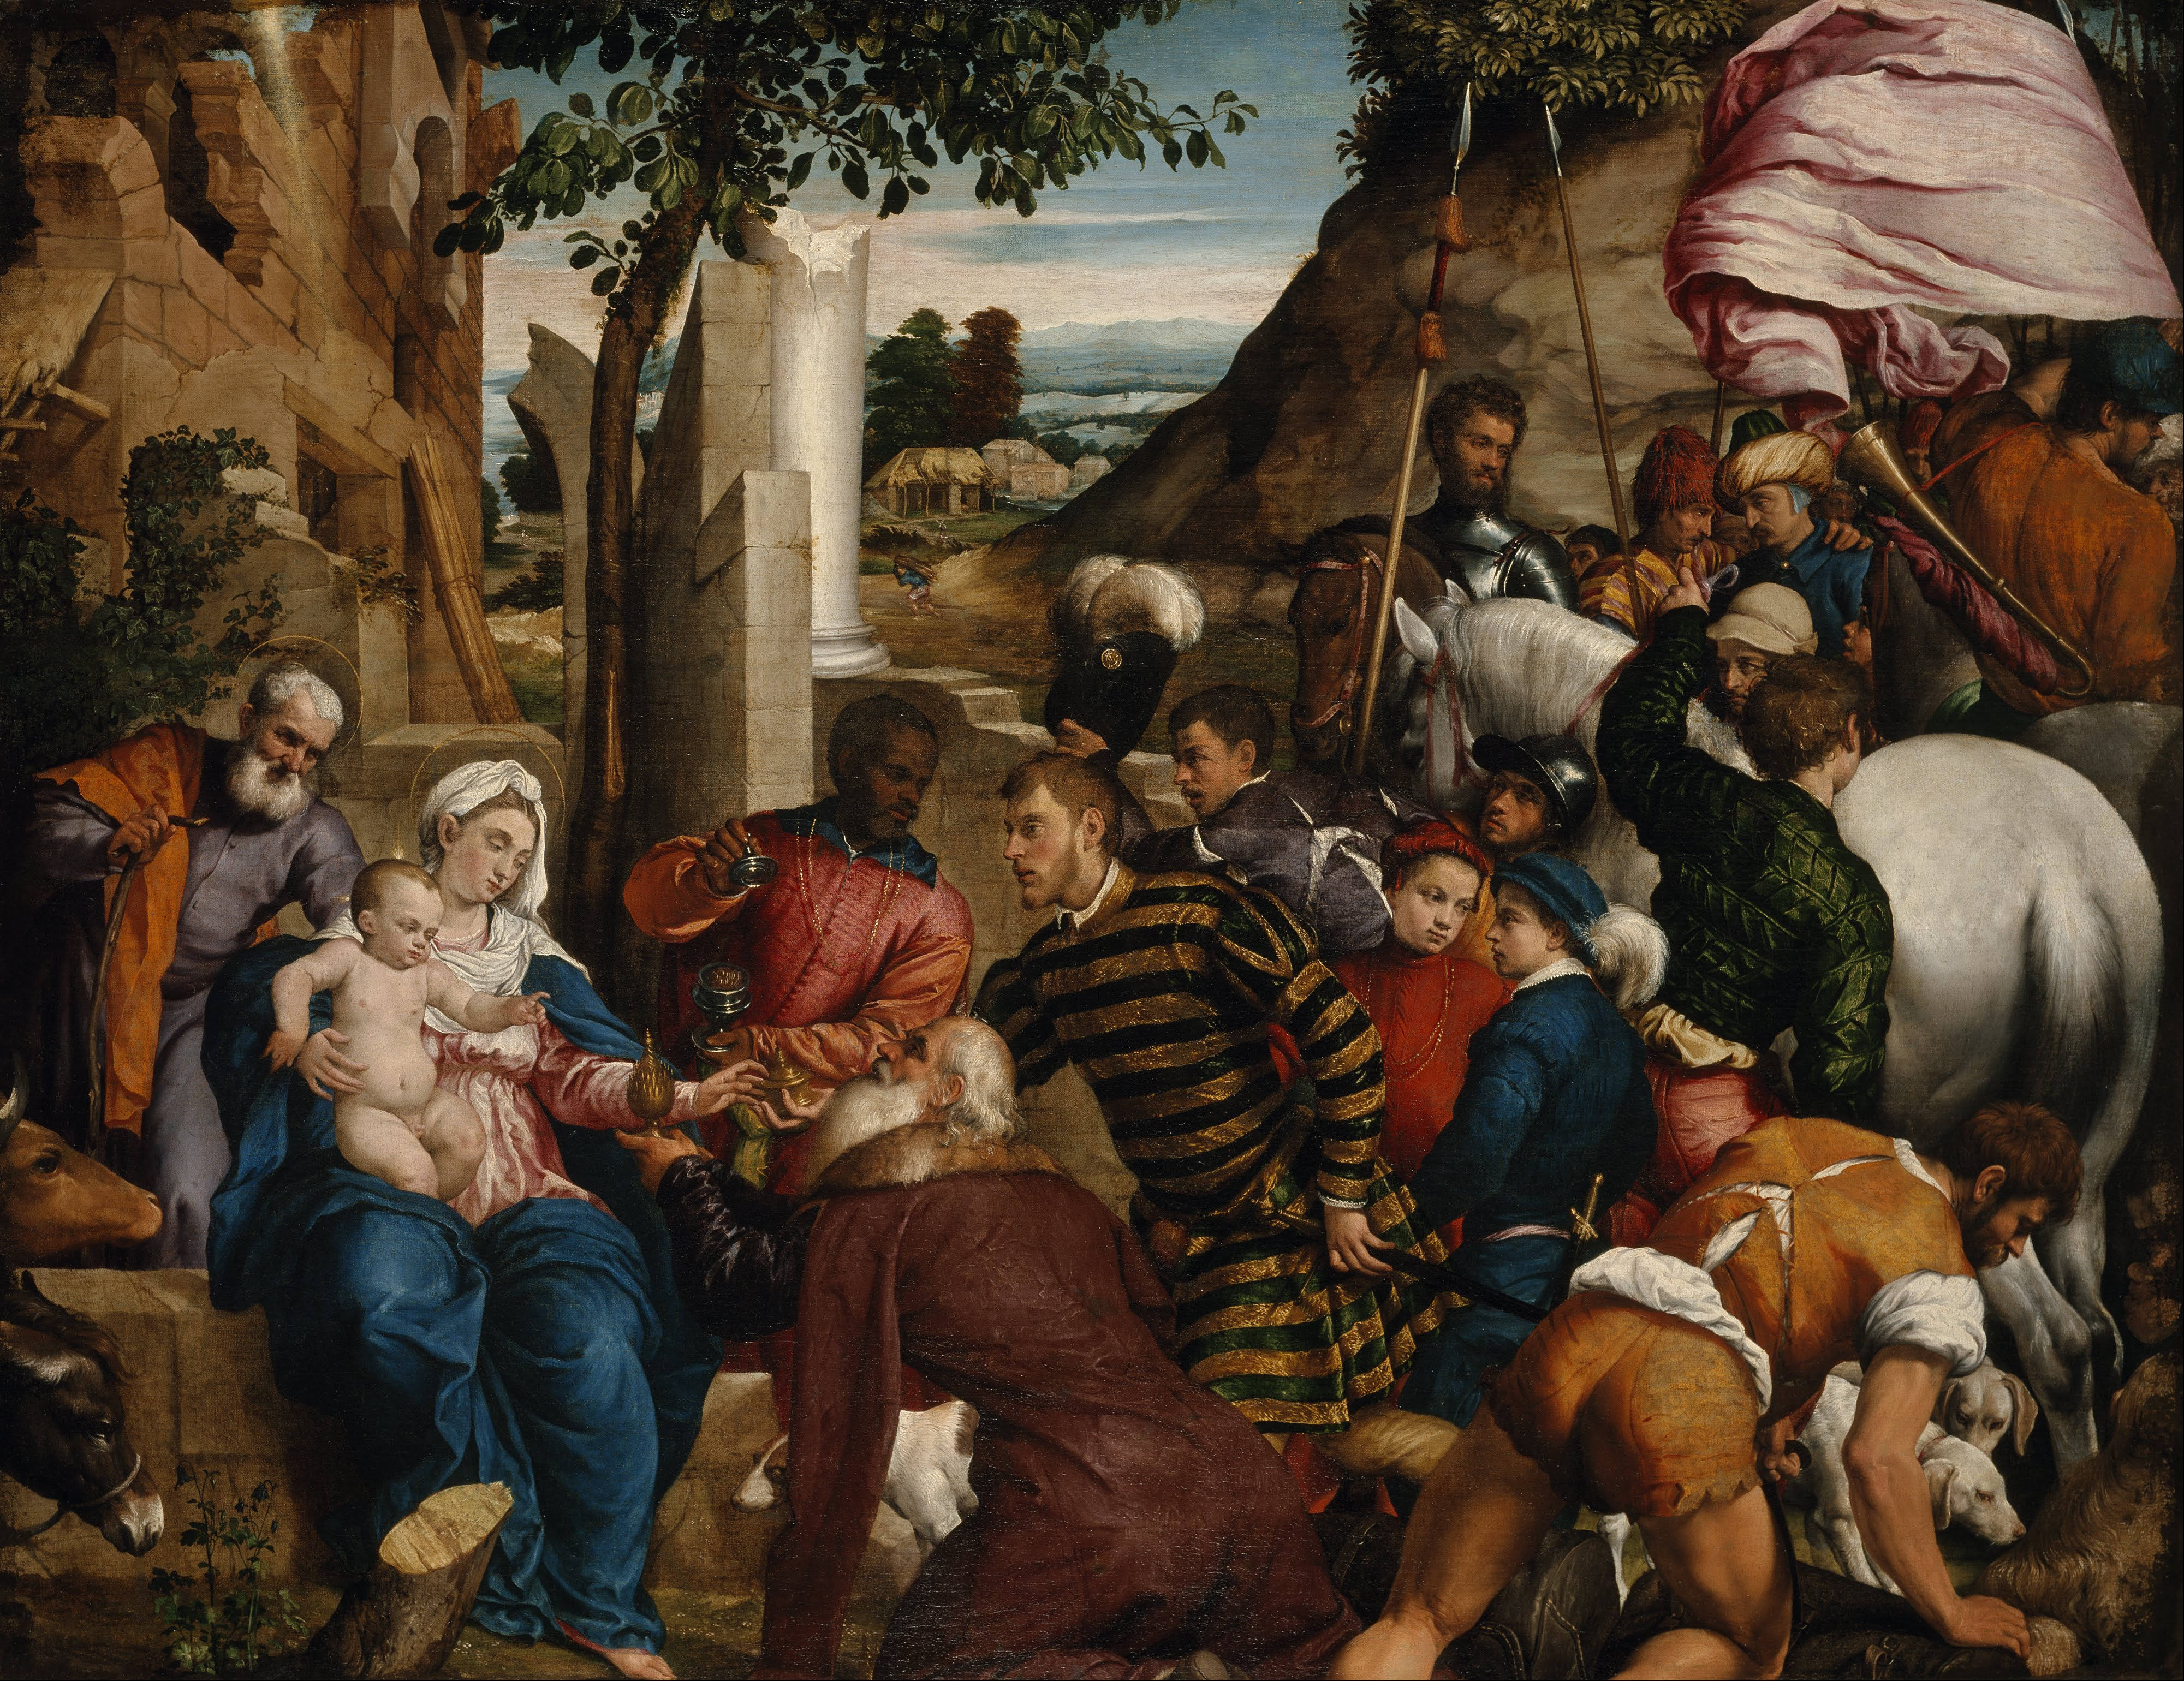 Jacopo Bassano (Jacopo dal Ponte) - The Adoration of the Kings - Google Art Project